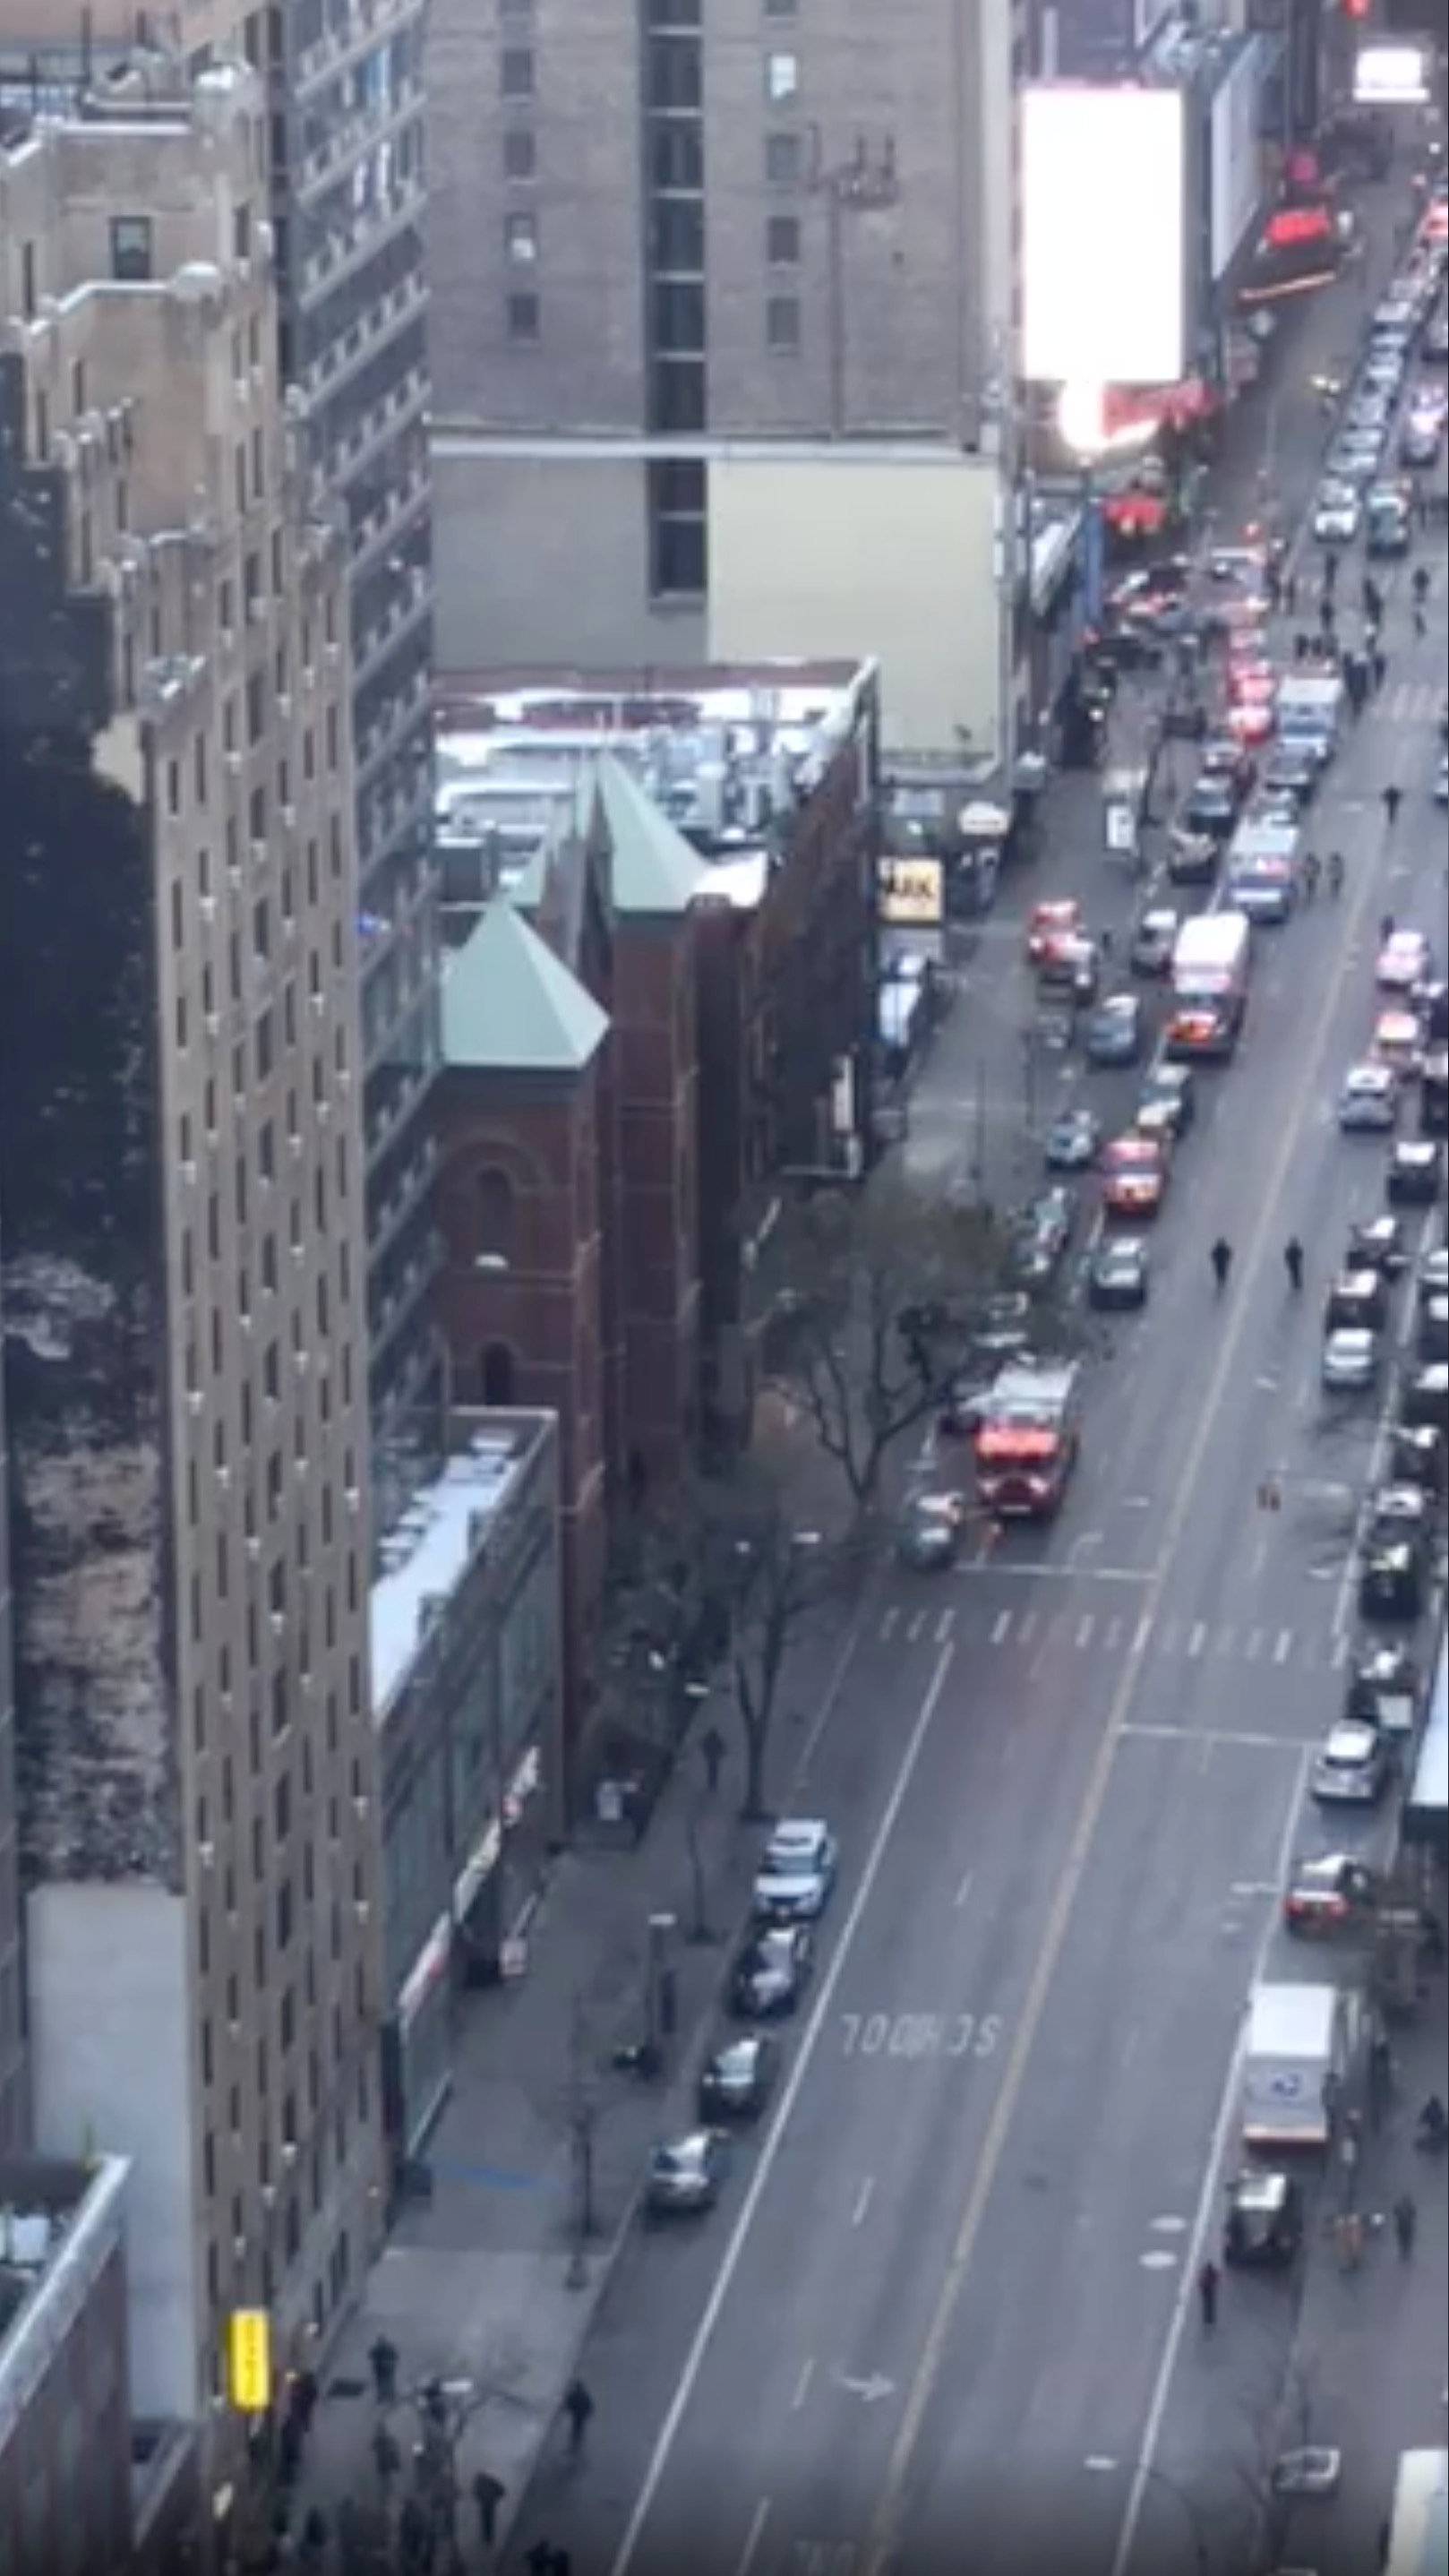 Emergency services are seen on the street following Manhattan explosion in New York